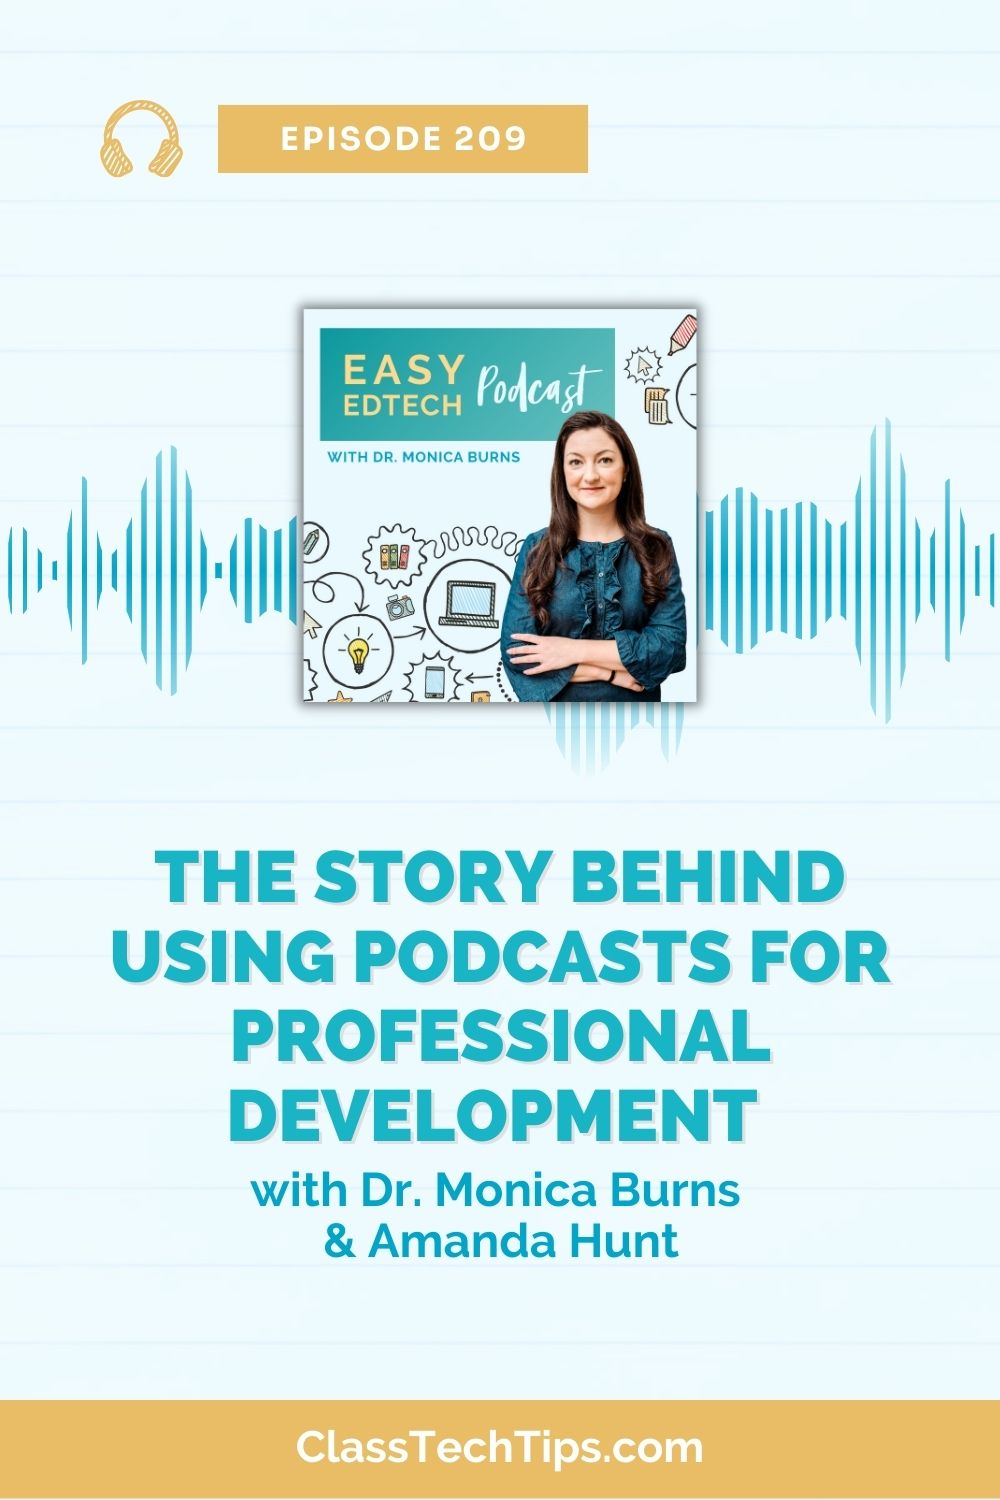 A podcast cover featuring Library Media Specialist Amanda Hunt, surrounded by a vibrant blue background, representing the transformative power of podcasts in professional learning for educators and the inspiration to incorporate EdTech in the classroom.